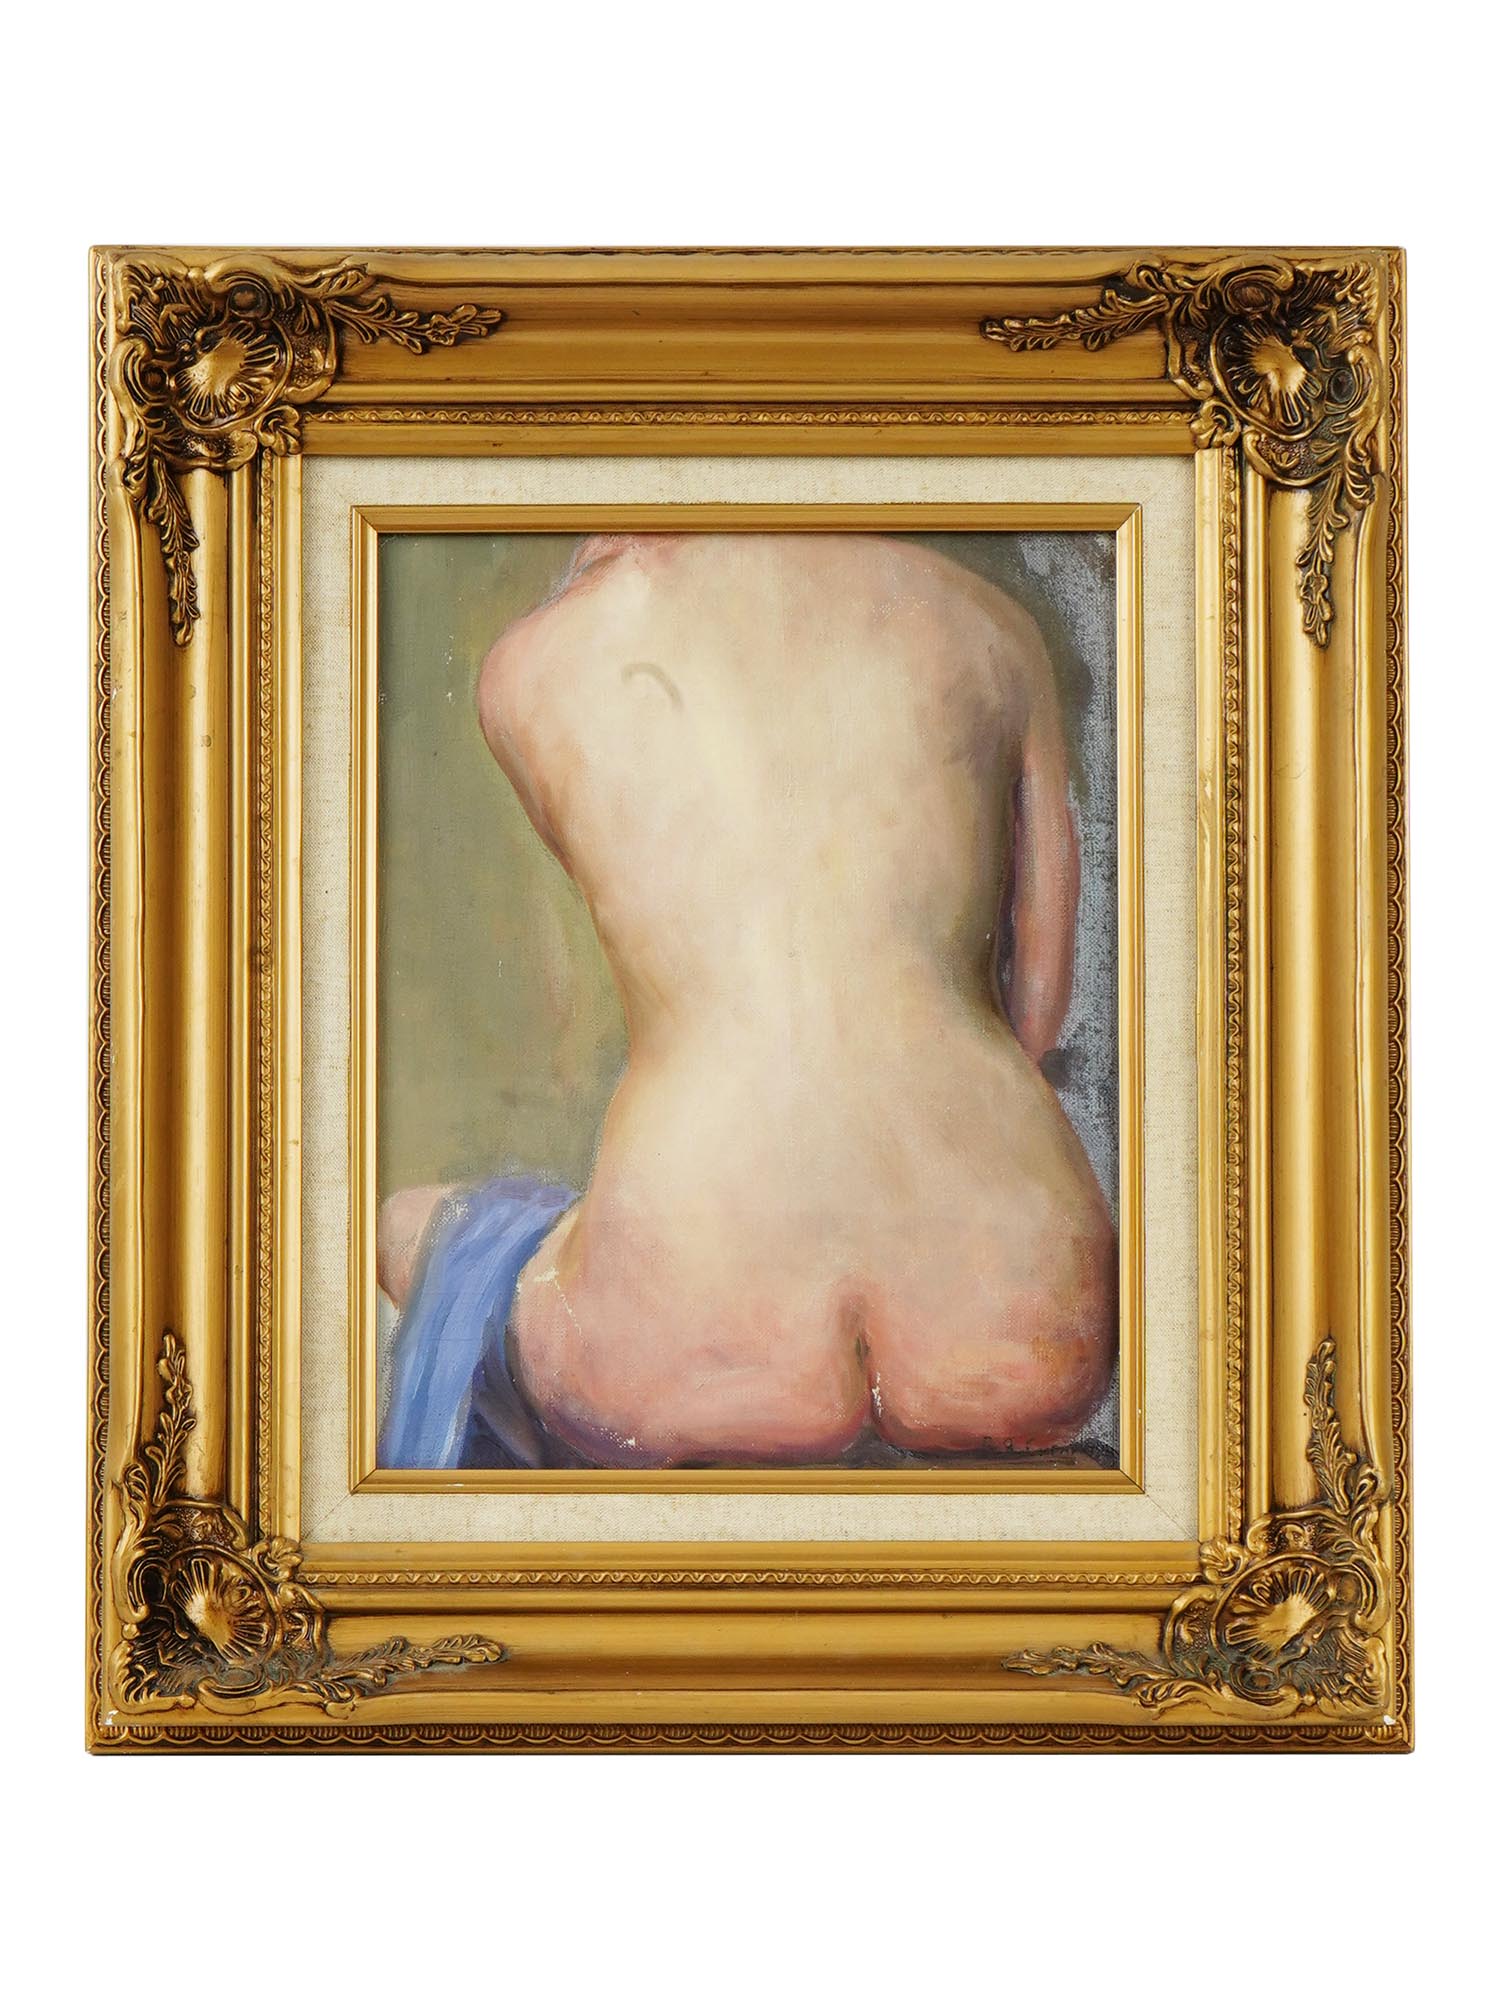 RUSSIAN NUDE WOMAN OIL PAINTING BY VASILY SITNIKOV PIC-0